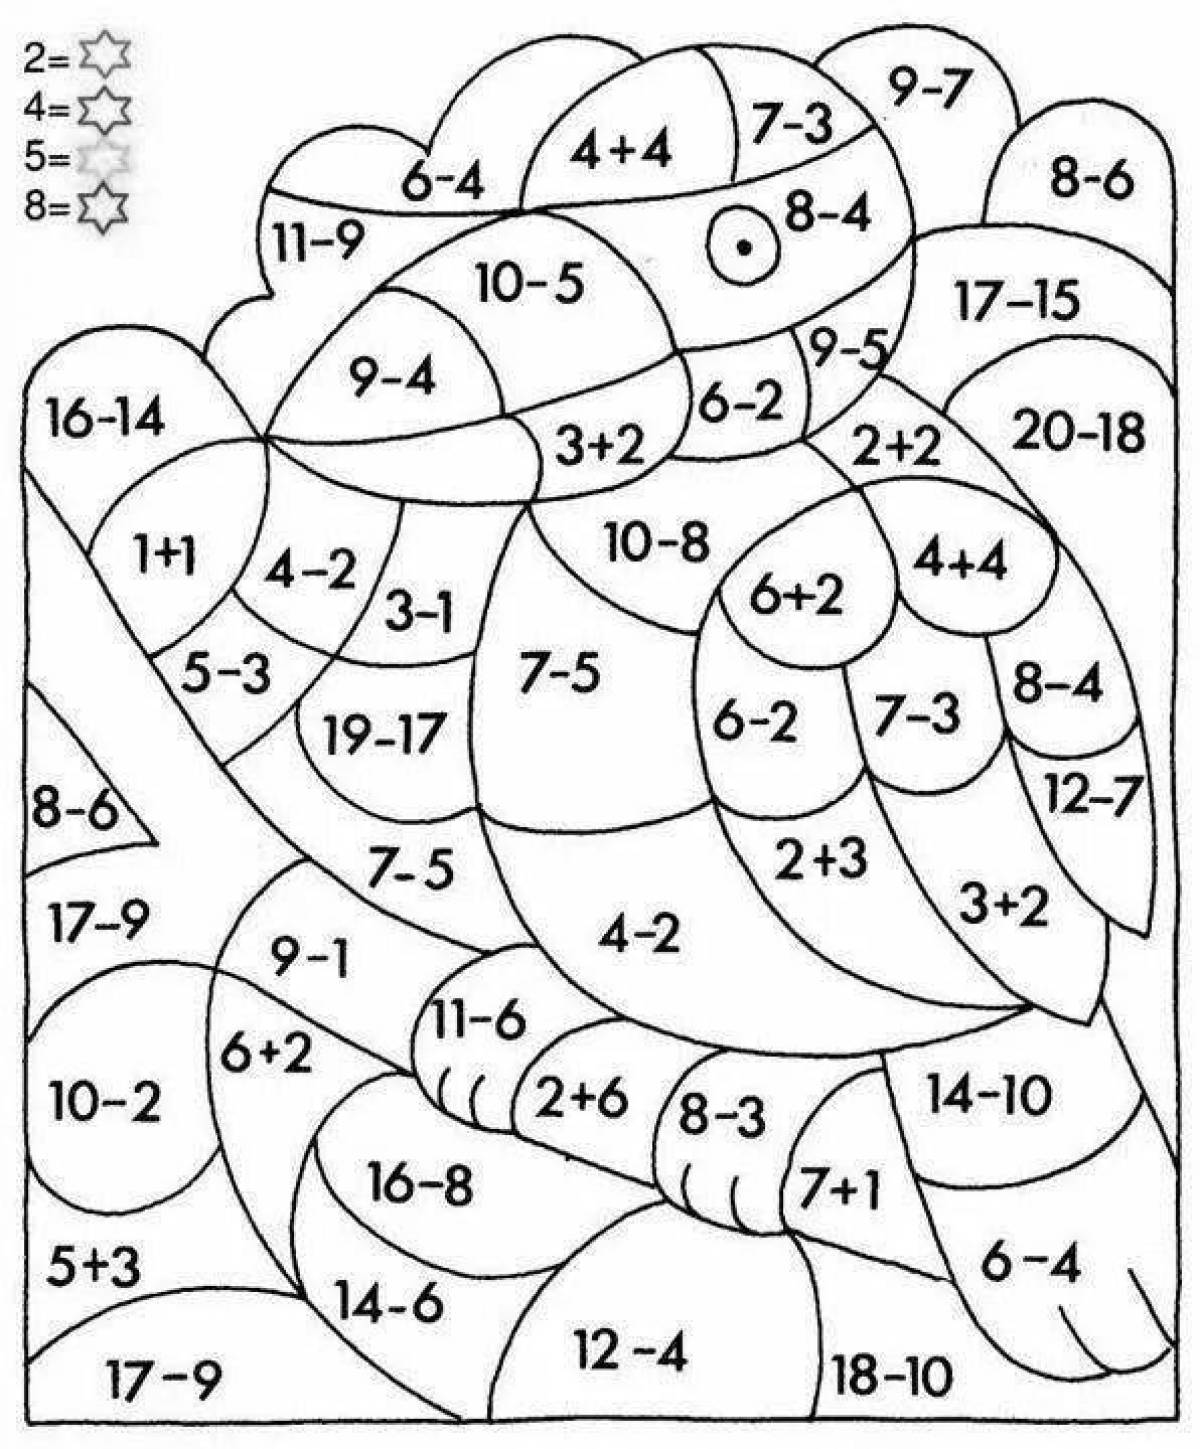 Examples for preschoolers 6 7 years old in math #8